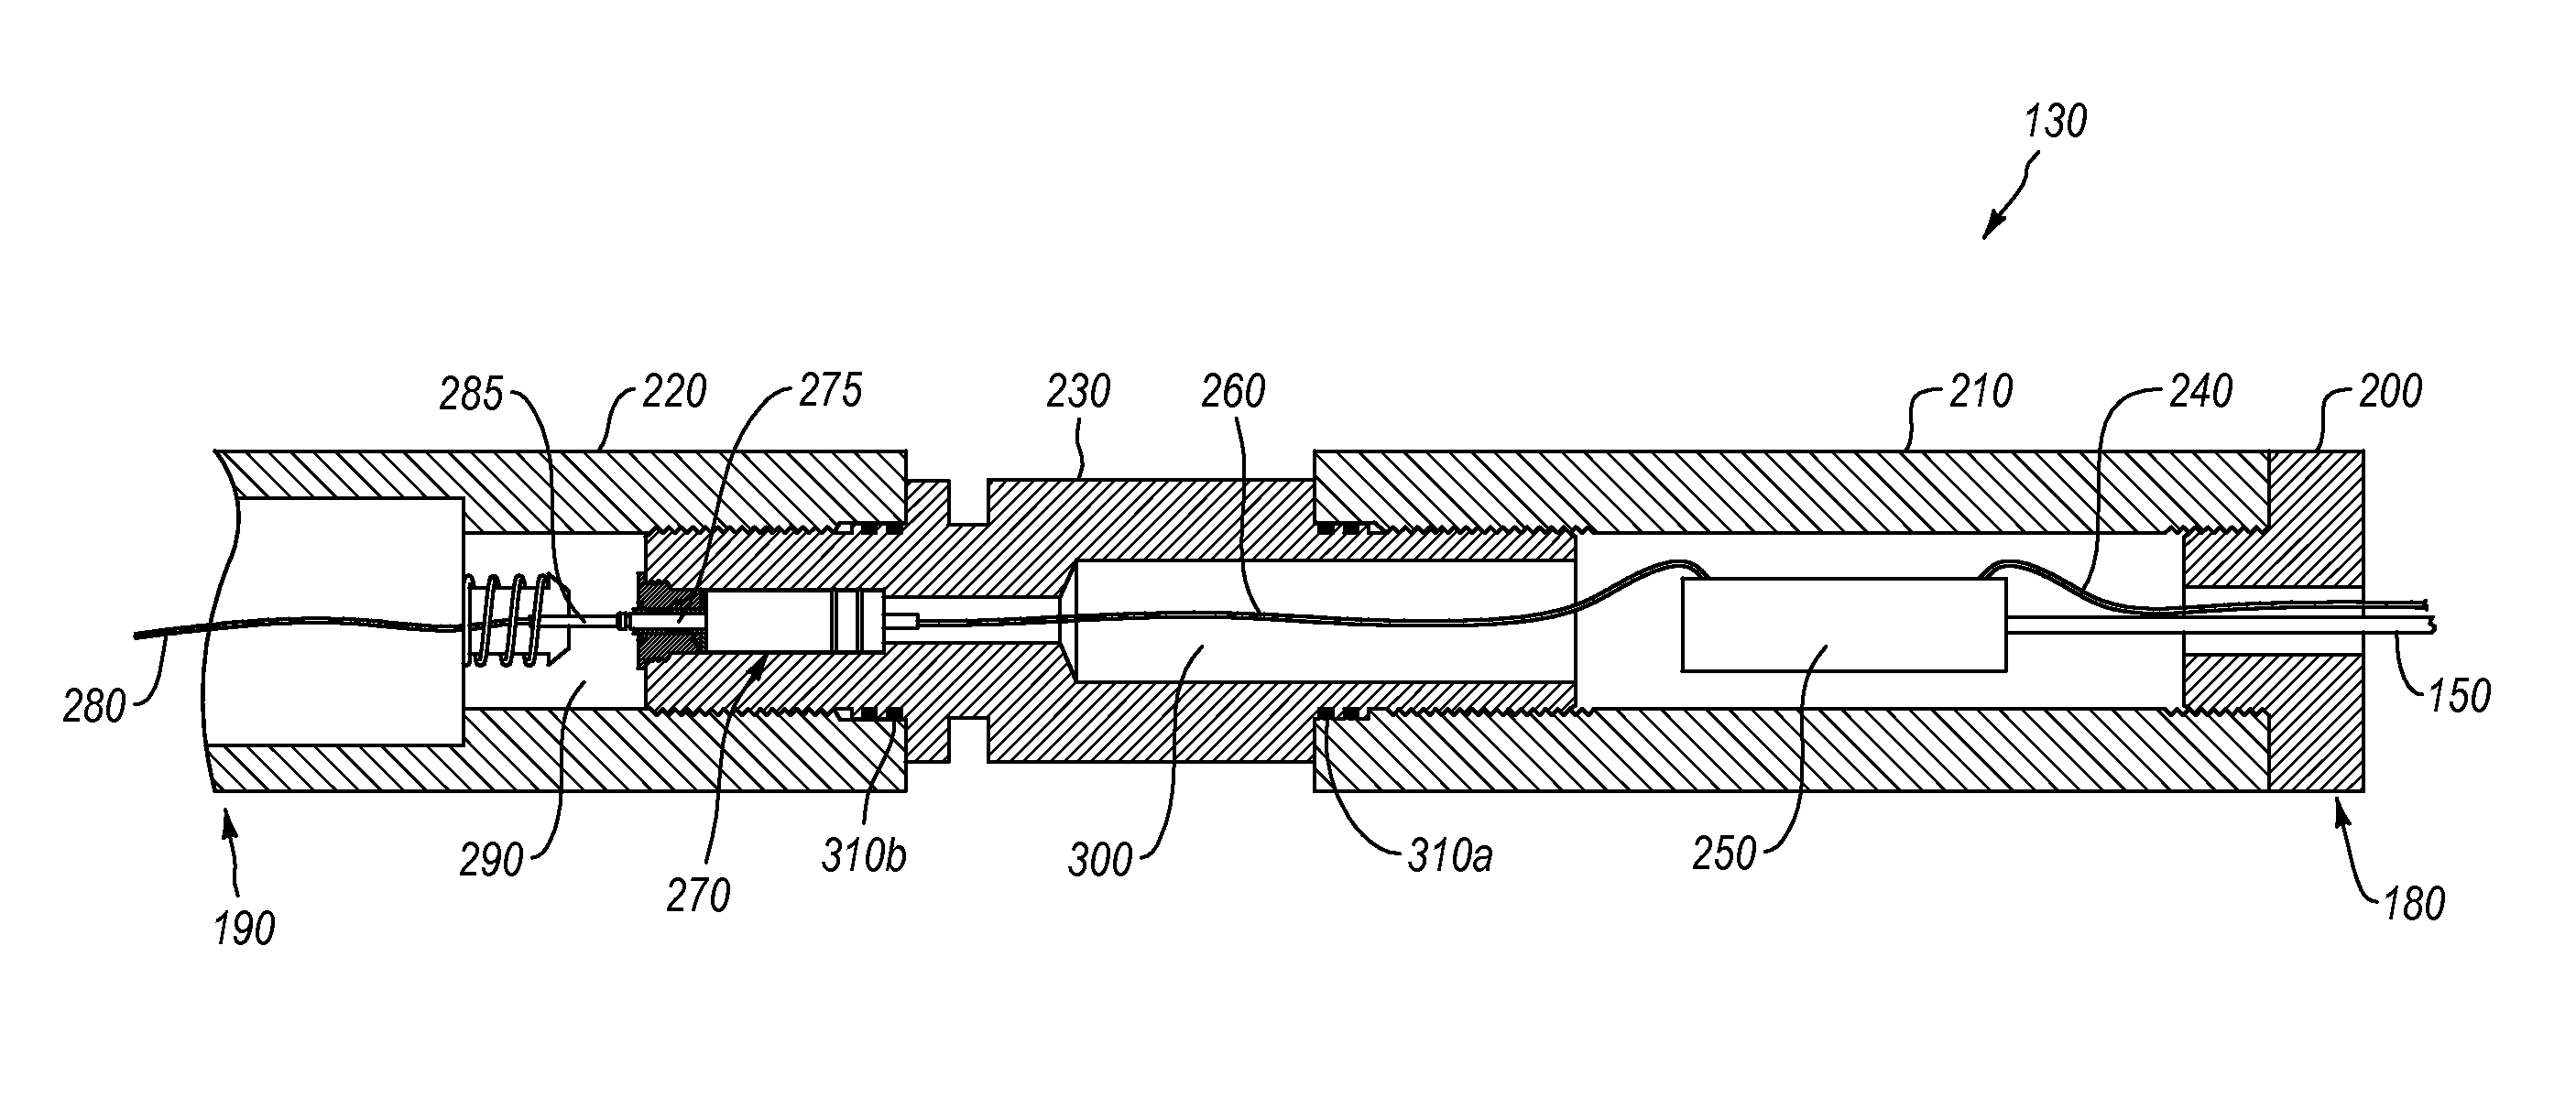 Pass-through bulkhead connection switch for a perforating gun